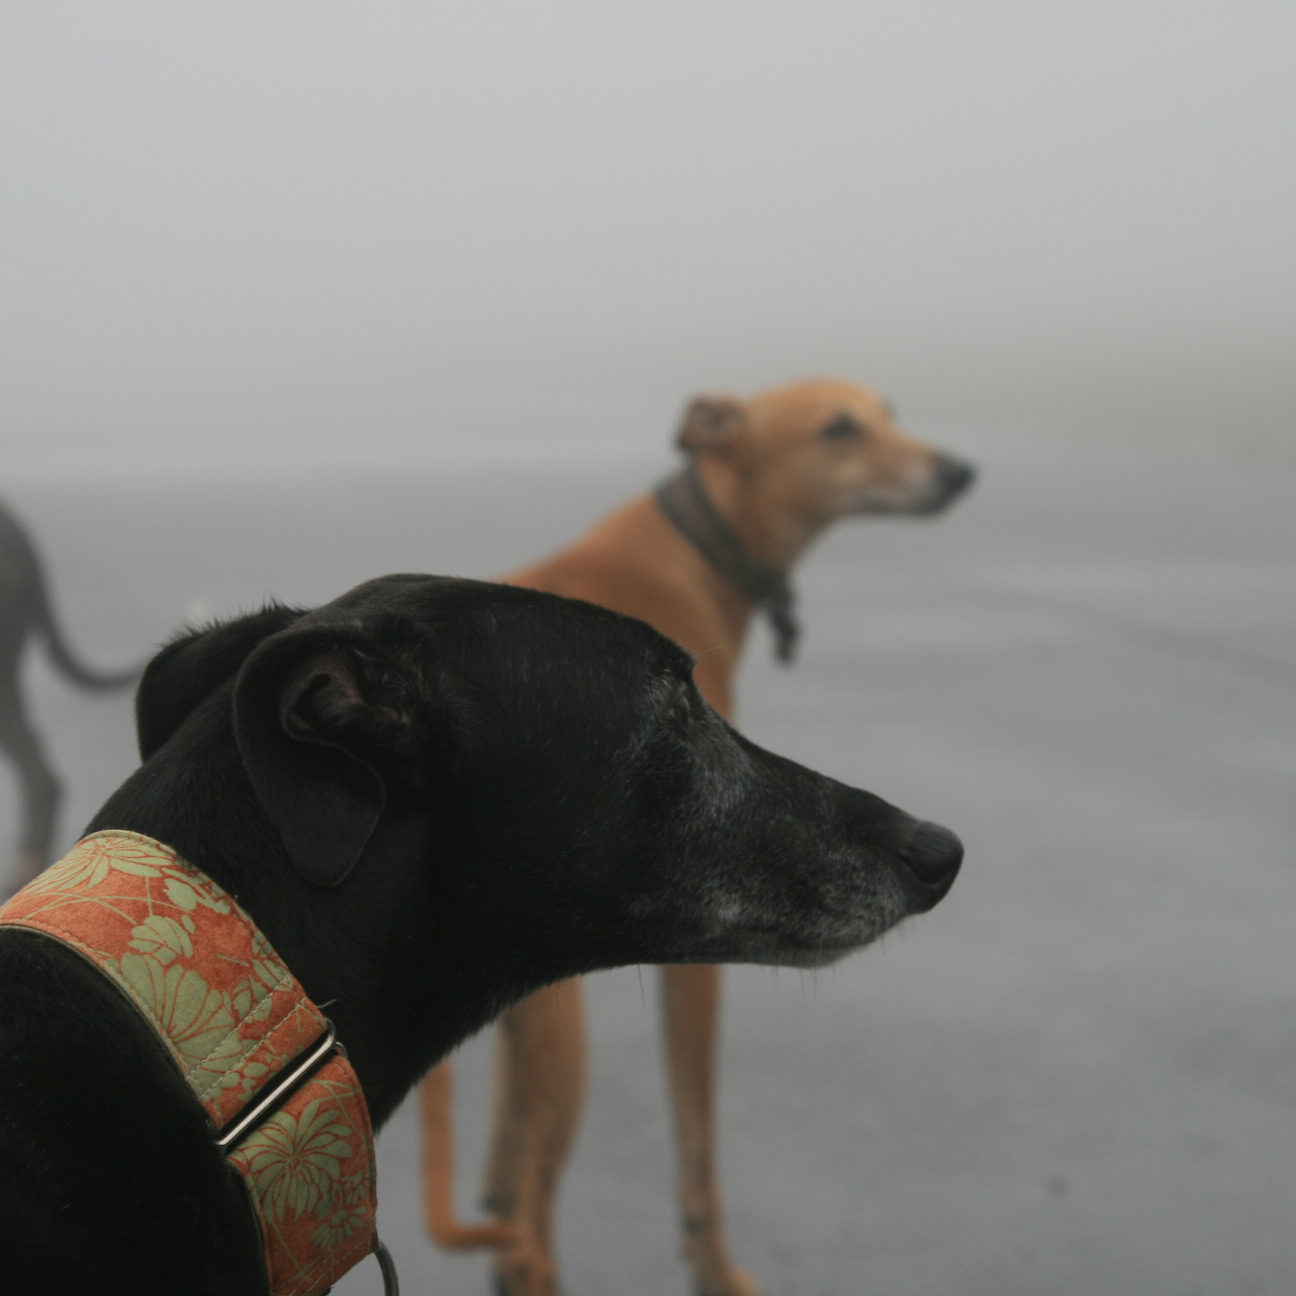 greyhounds staring into the distance against a foggy, concrete path for the background